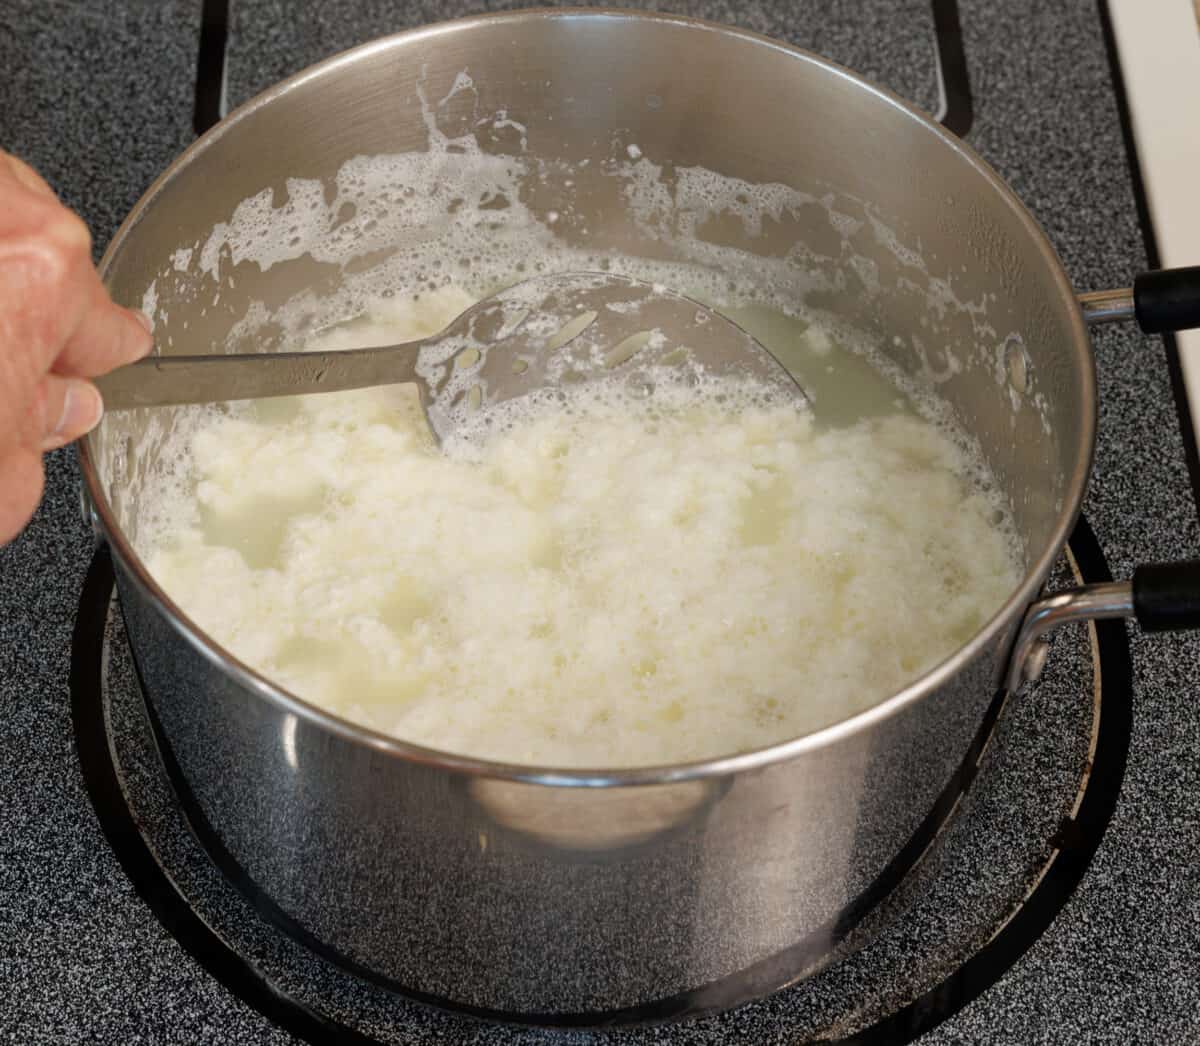 hot milk mixed with lemon juice causing curdling in a pot.